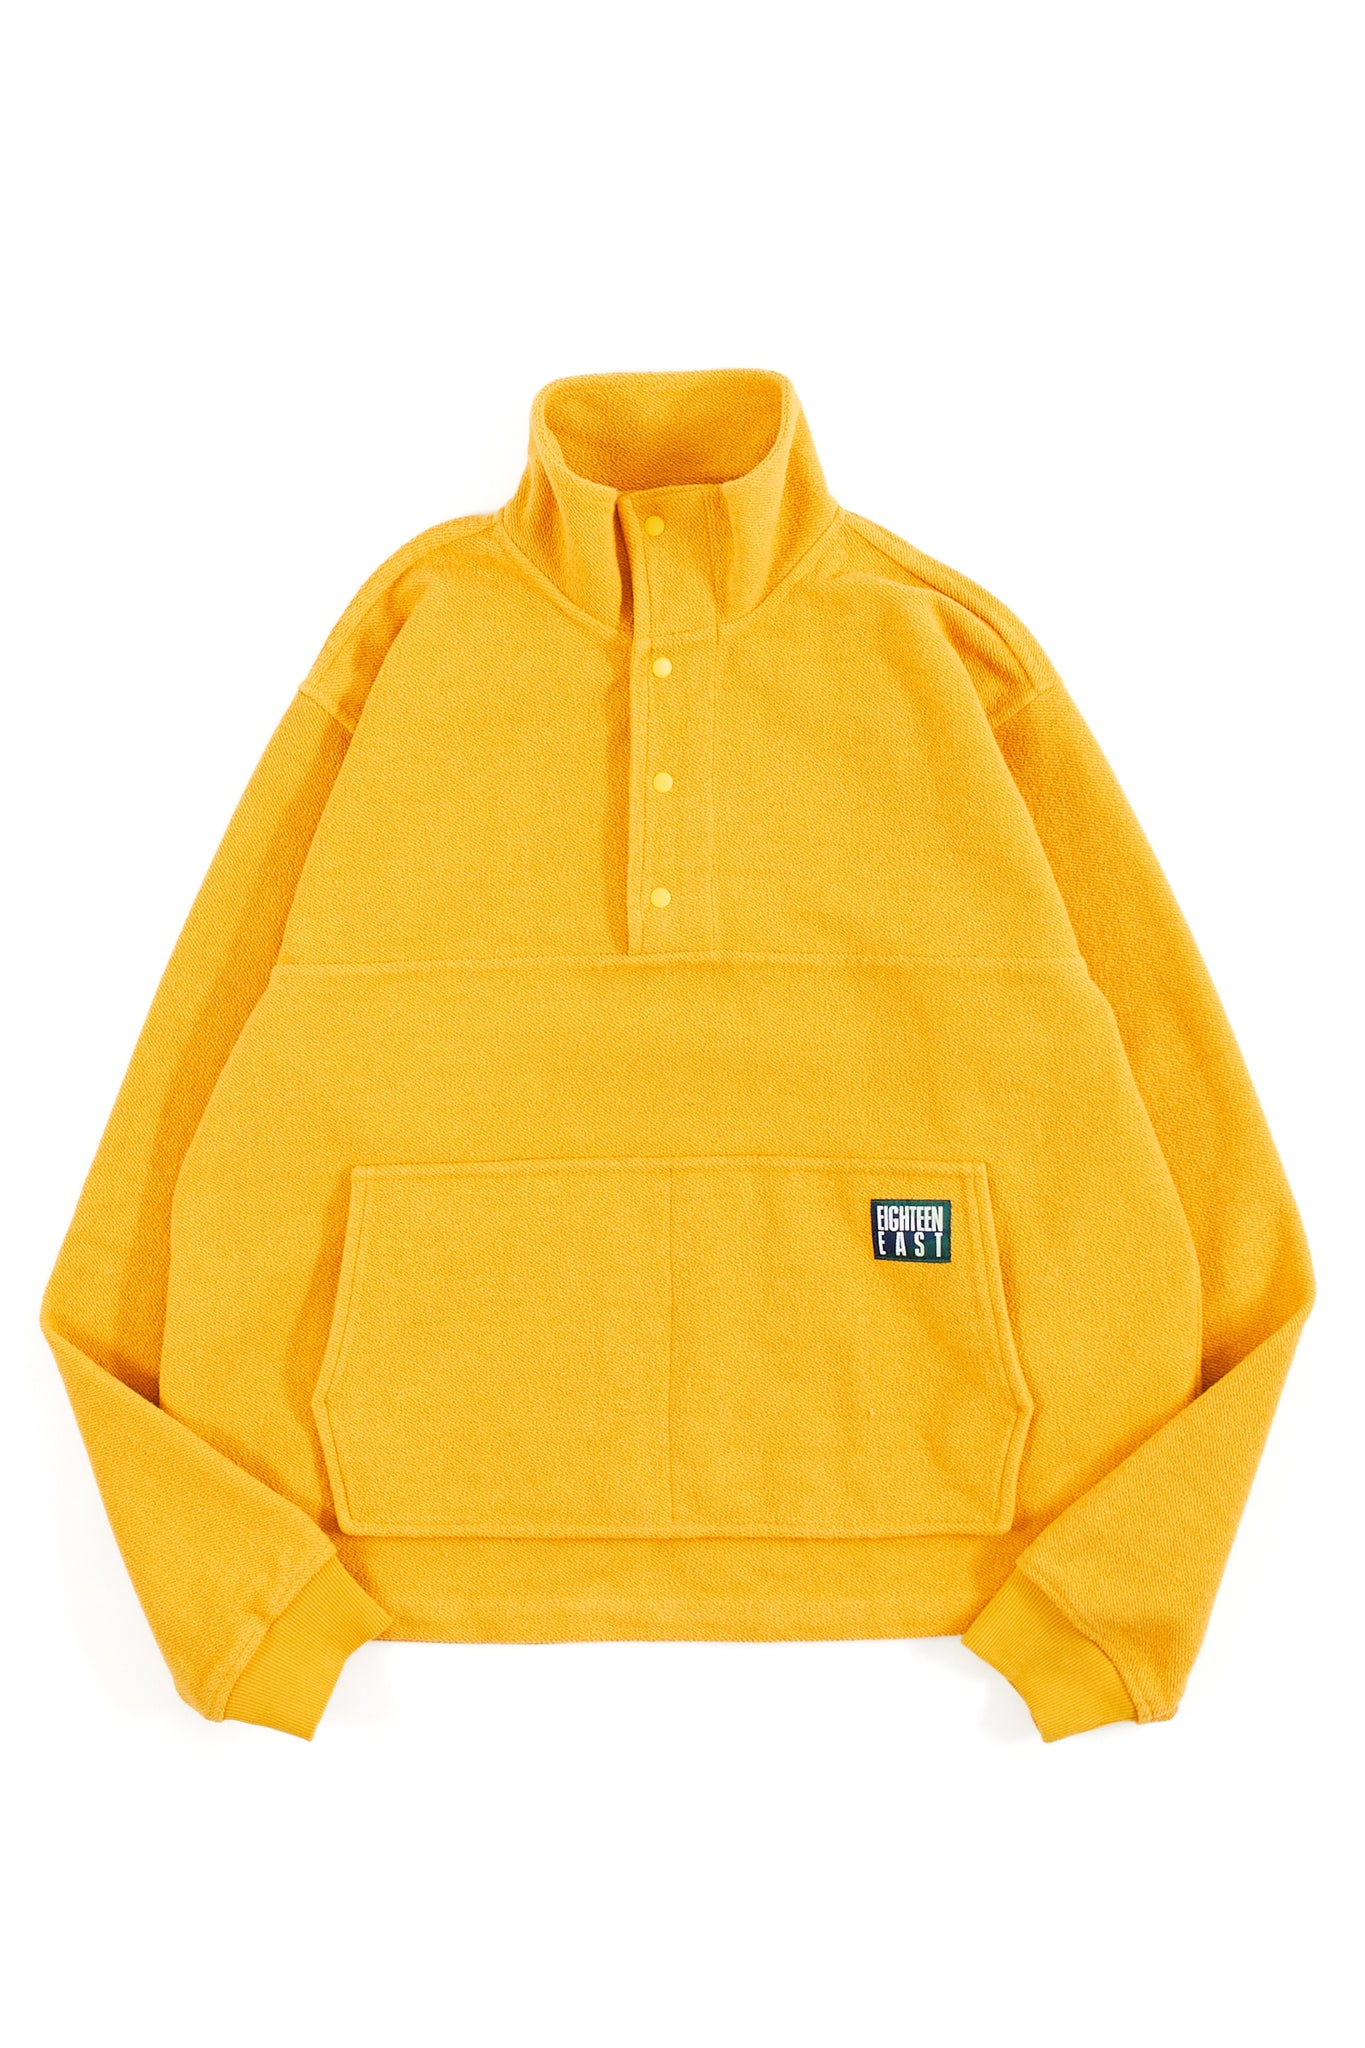 SNAP NECK PULLOVER SWEATSHIRT - GOLDEN RAY INSIDE-OUT LOOPBACK TERRY FLEECE